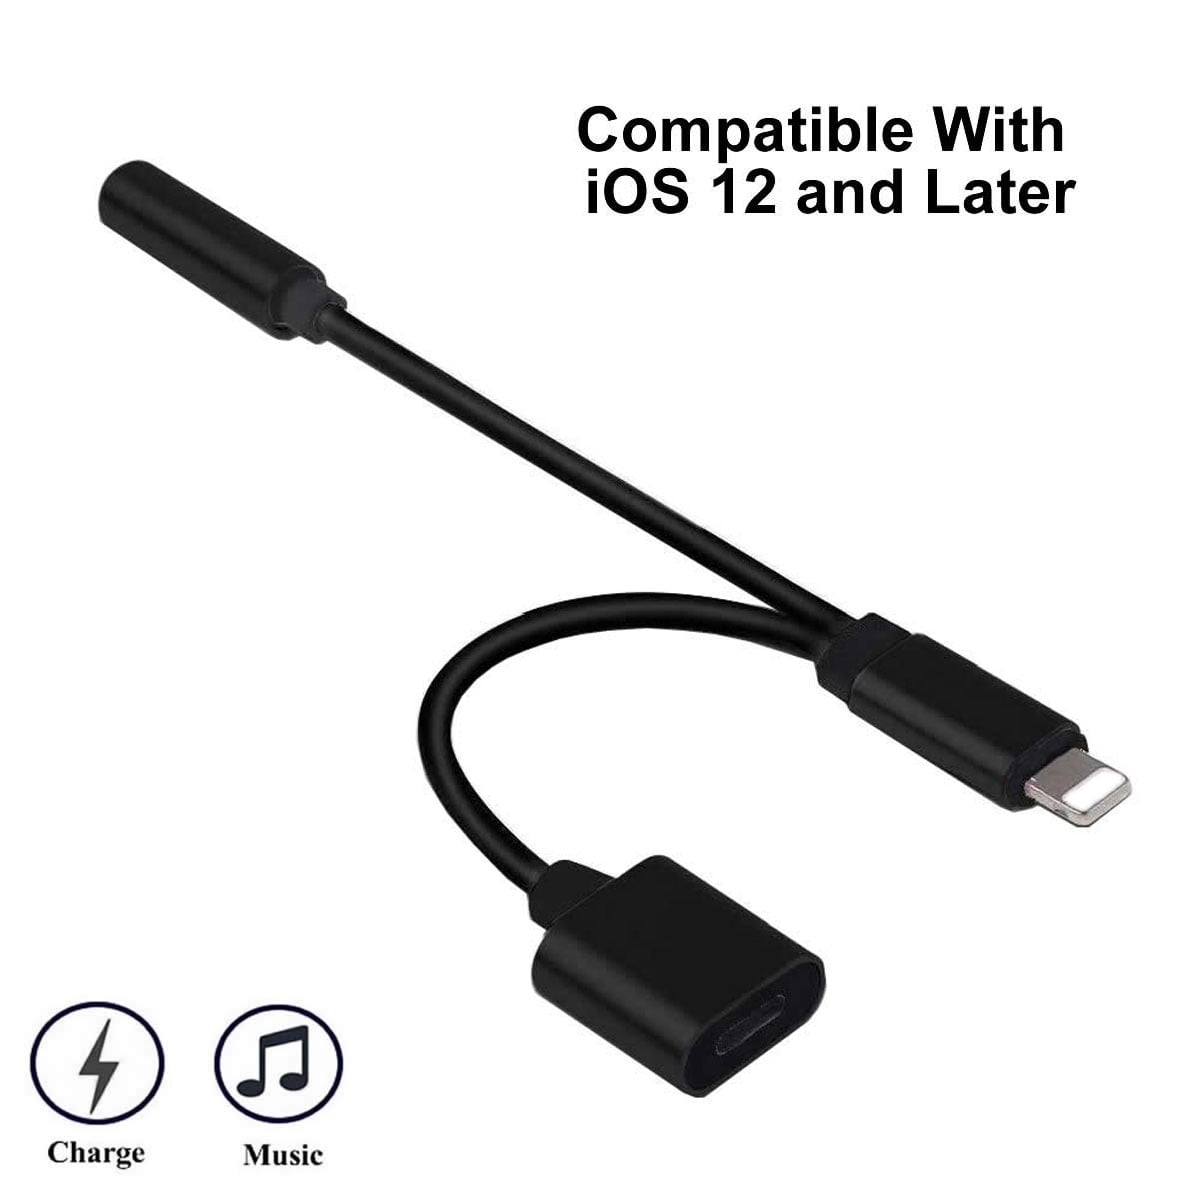 2 In 1 Lightning Adapter And Charger 2 Port Lightning To 3 5mm Aux Headphone Jack And Charger Cable Adapter Compatible For Iphone Xs Xs Max Xr X 7 8 Support Ios 11 Ios 12 I6063 Walmart Com